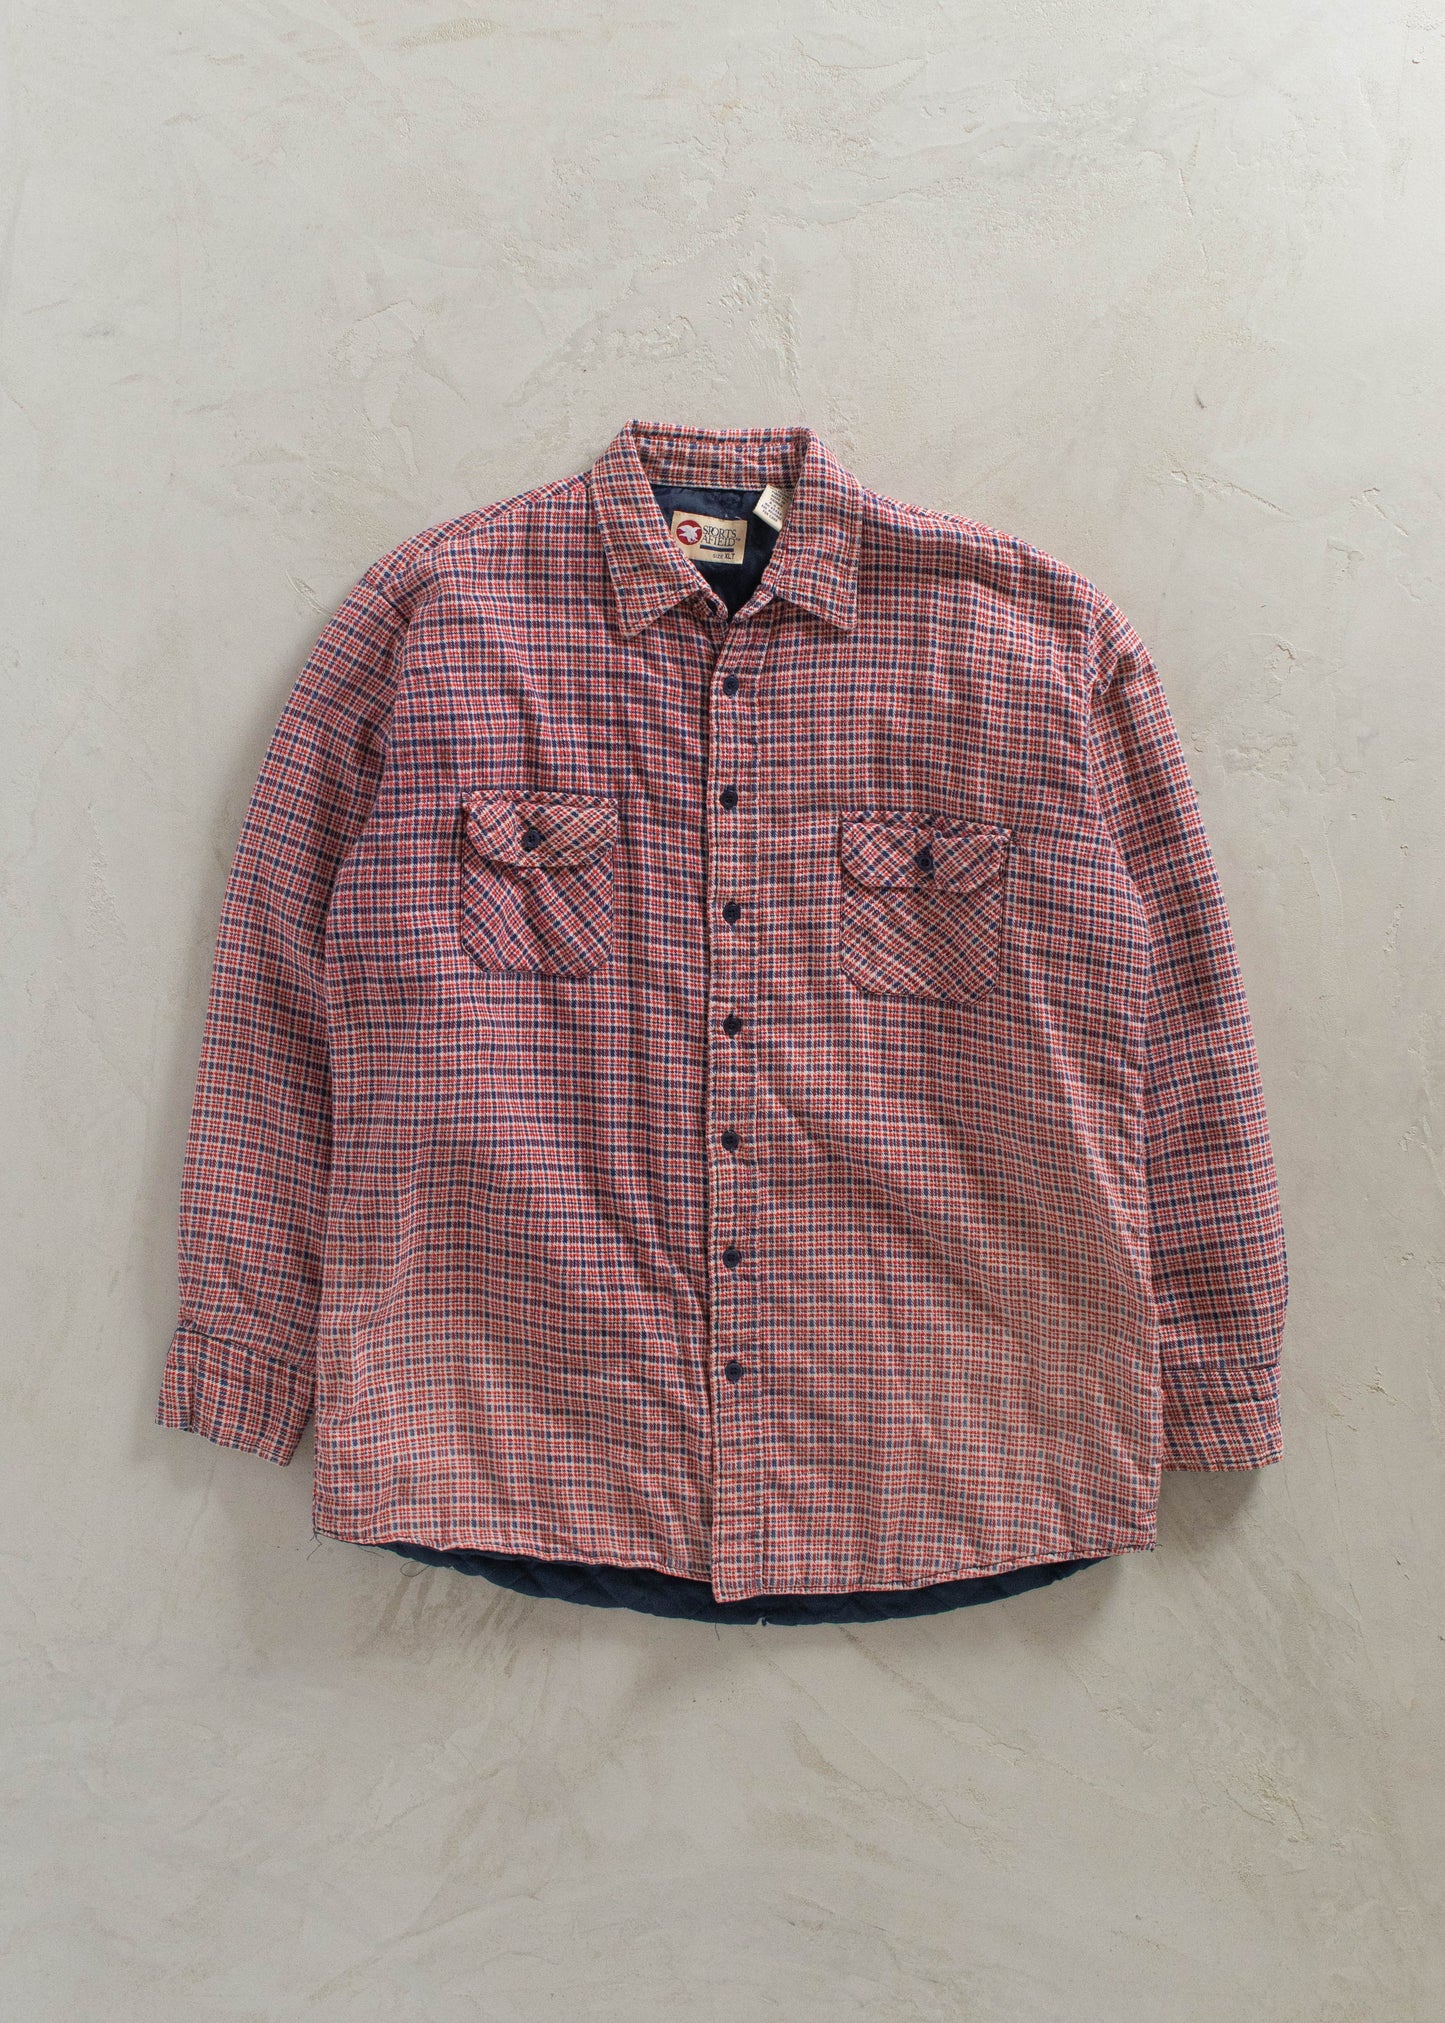 1990s Padded Cotton Flannel Button Up Shirt Size L/XL